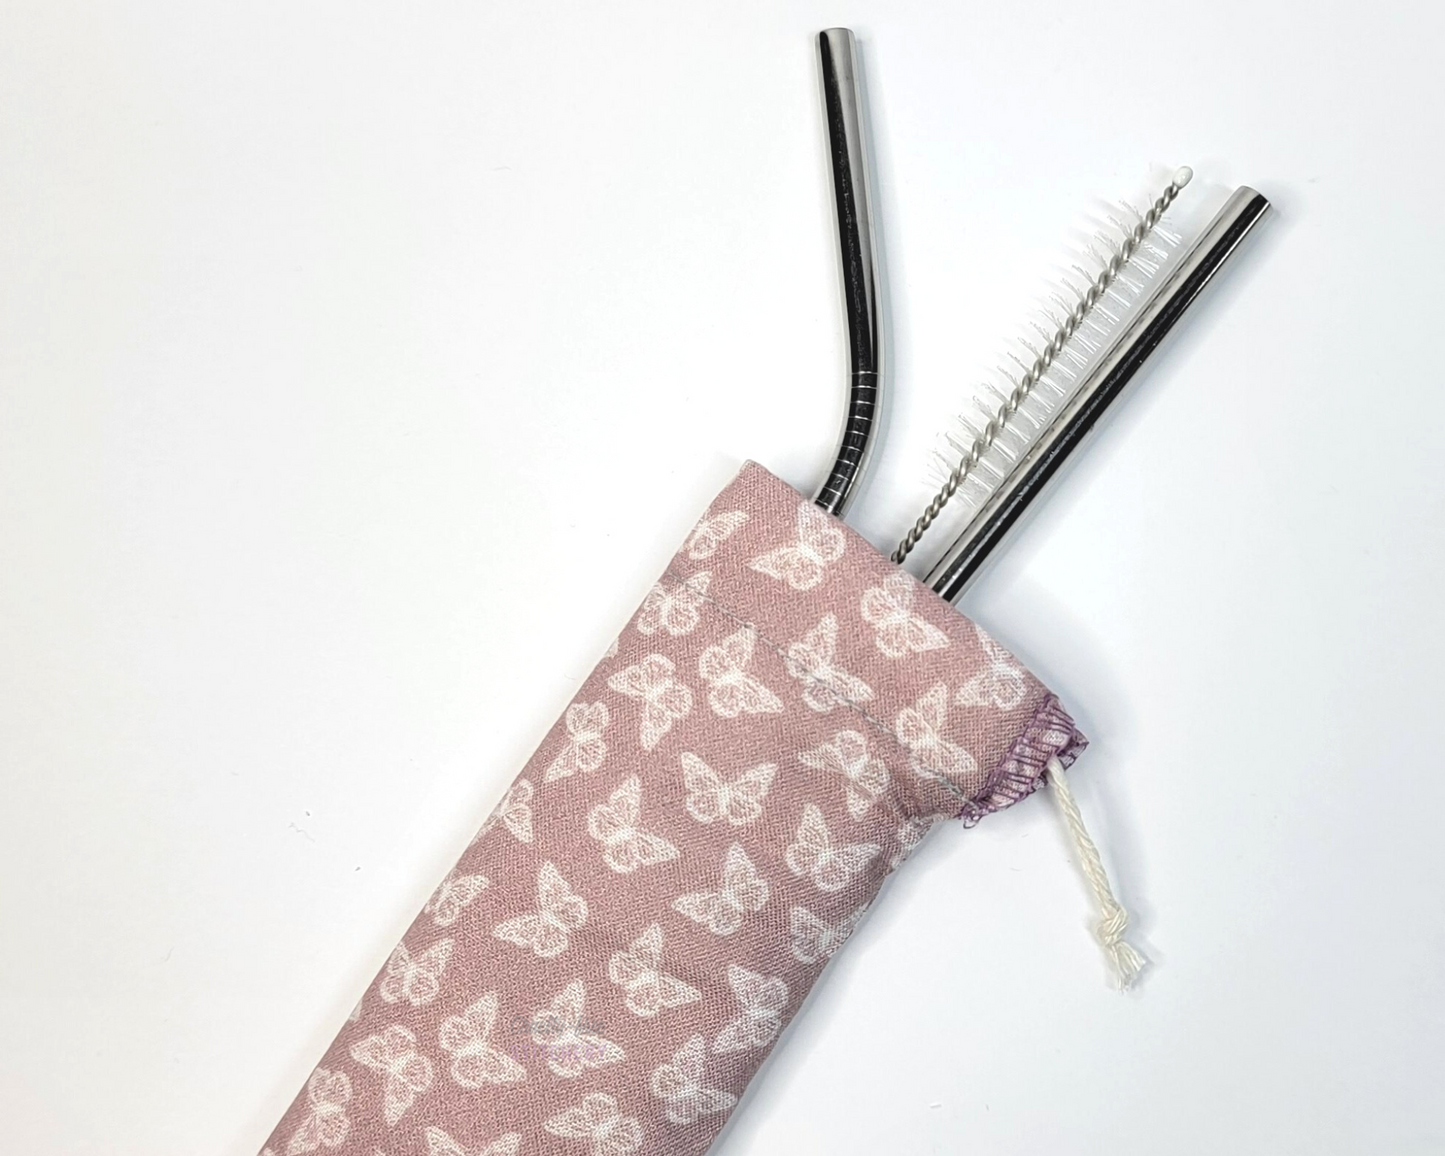 Reusable straw pouch with stainless steel straws sticking out the top. The fabric of the pouch is a light pink mauve with tiny white butterflies and it has a drawstring closure.